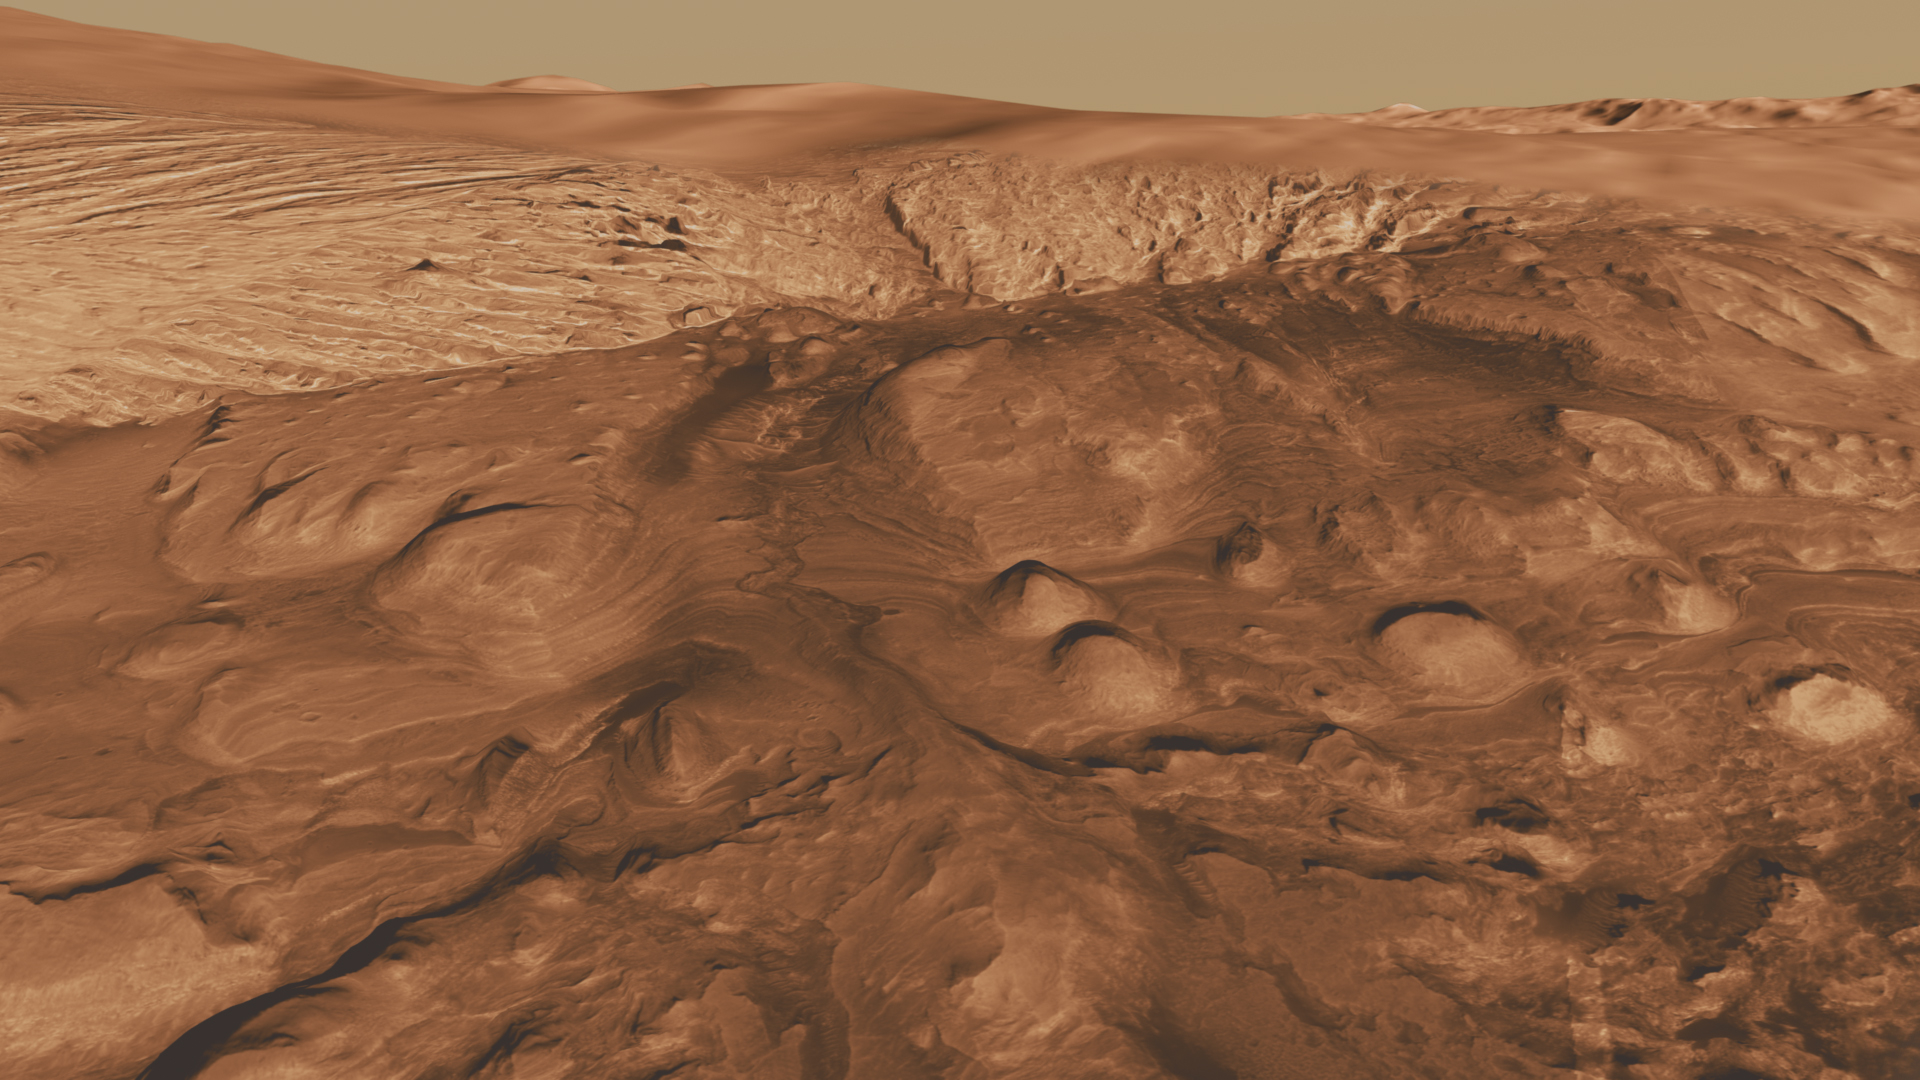 This oblique view of the mound in Gale crater shows several different rock types of interest to the Mars Science Laboratory mission.